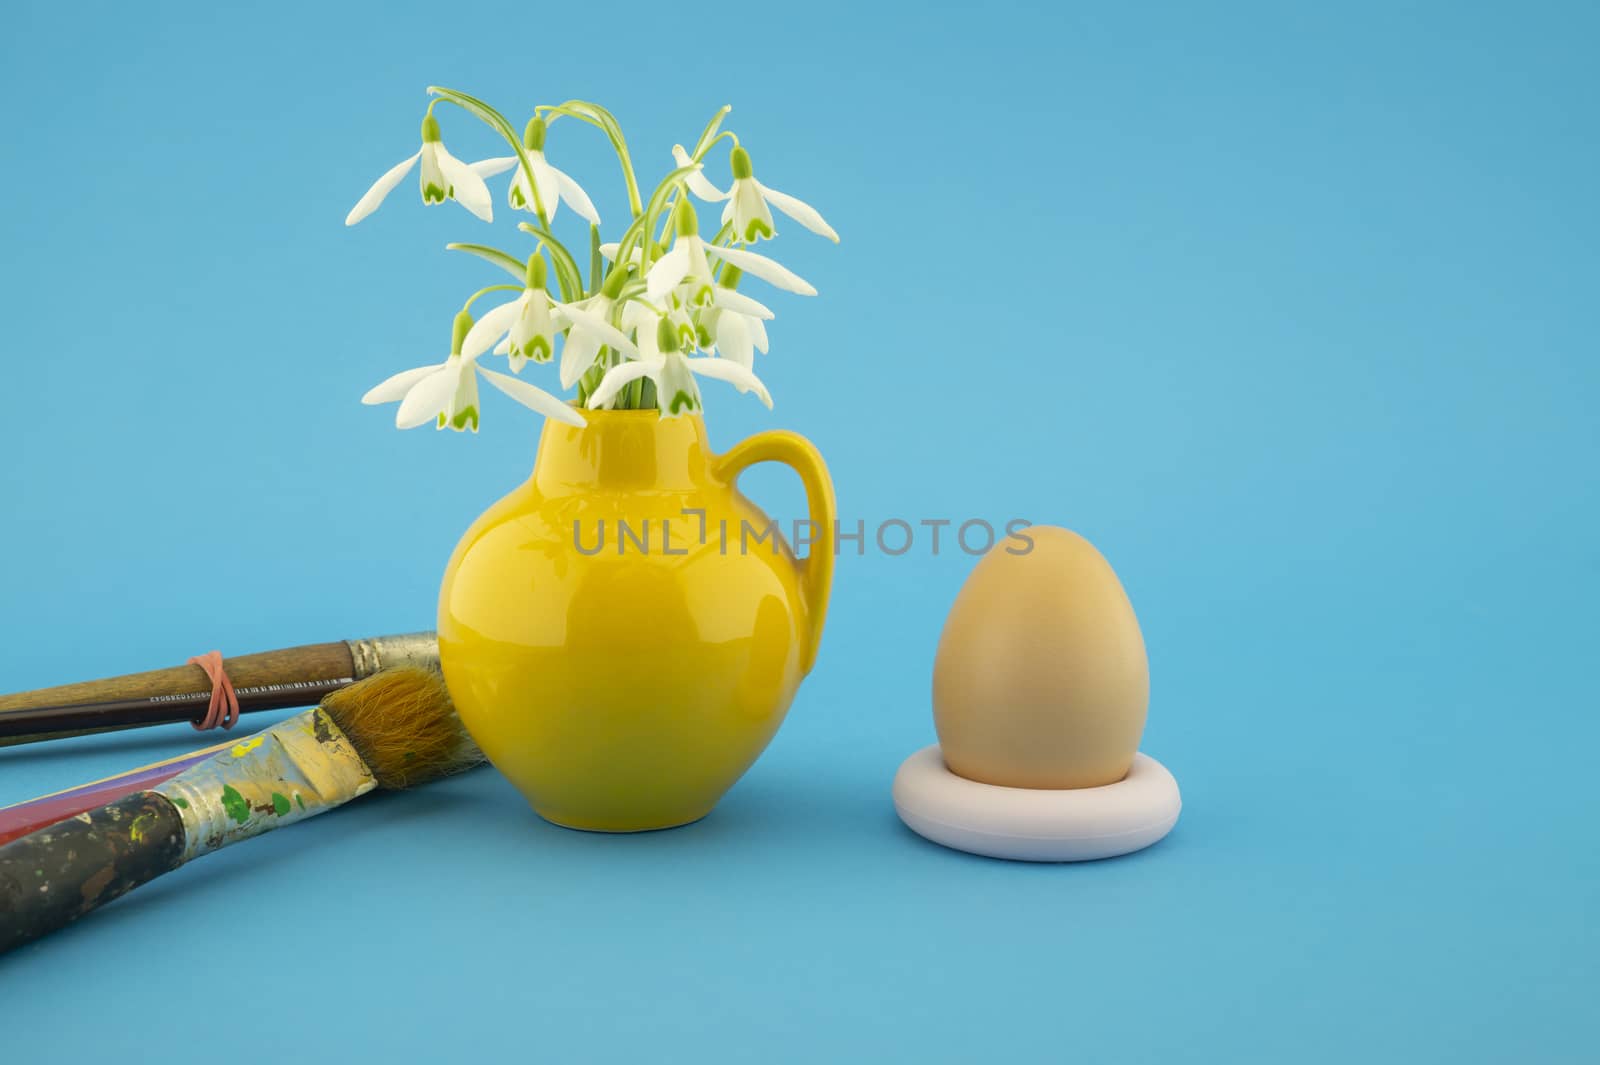 Easter egg decoration concept with paint brushes and yellow jug with fresh white spring flowers. Studio still life on blue background